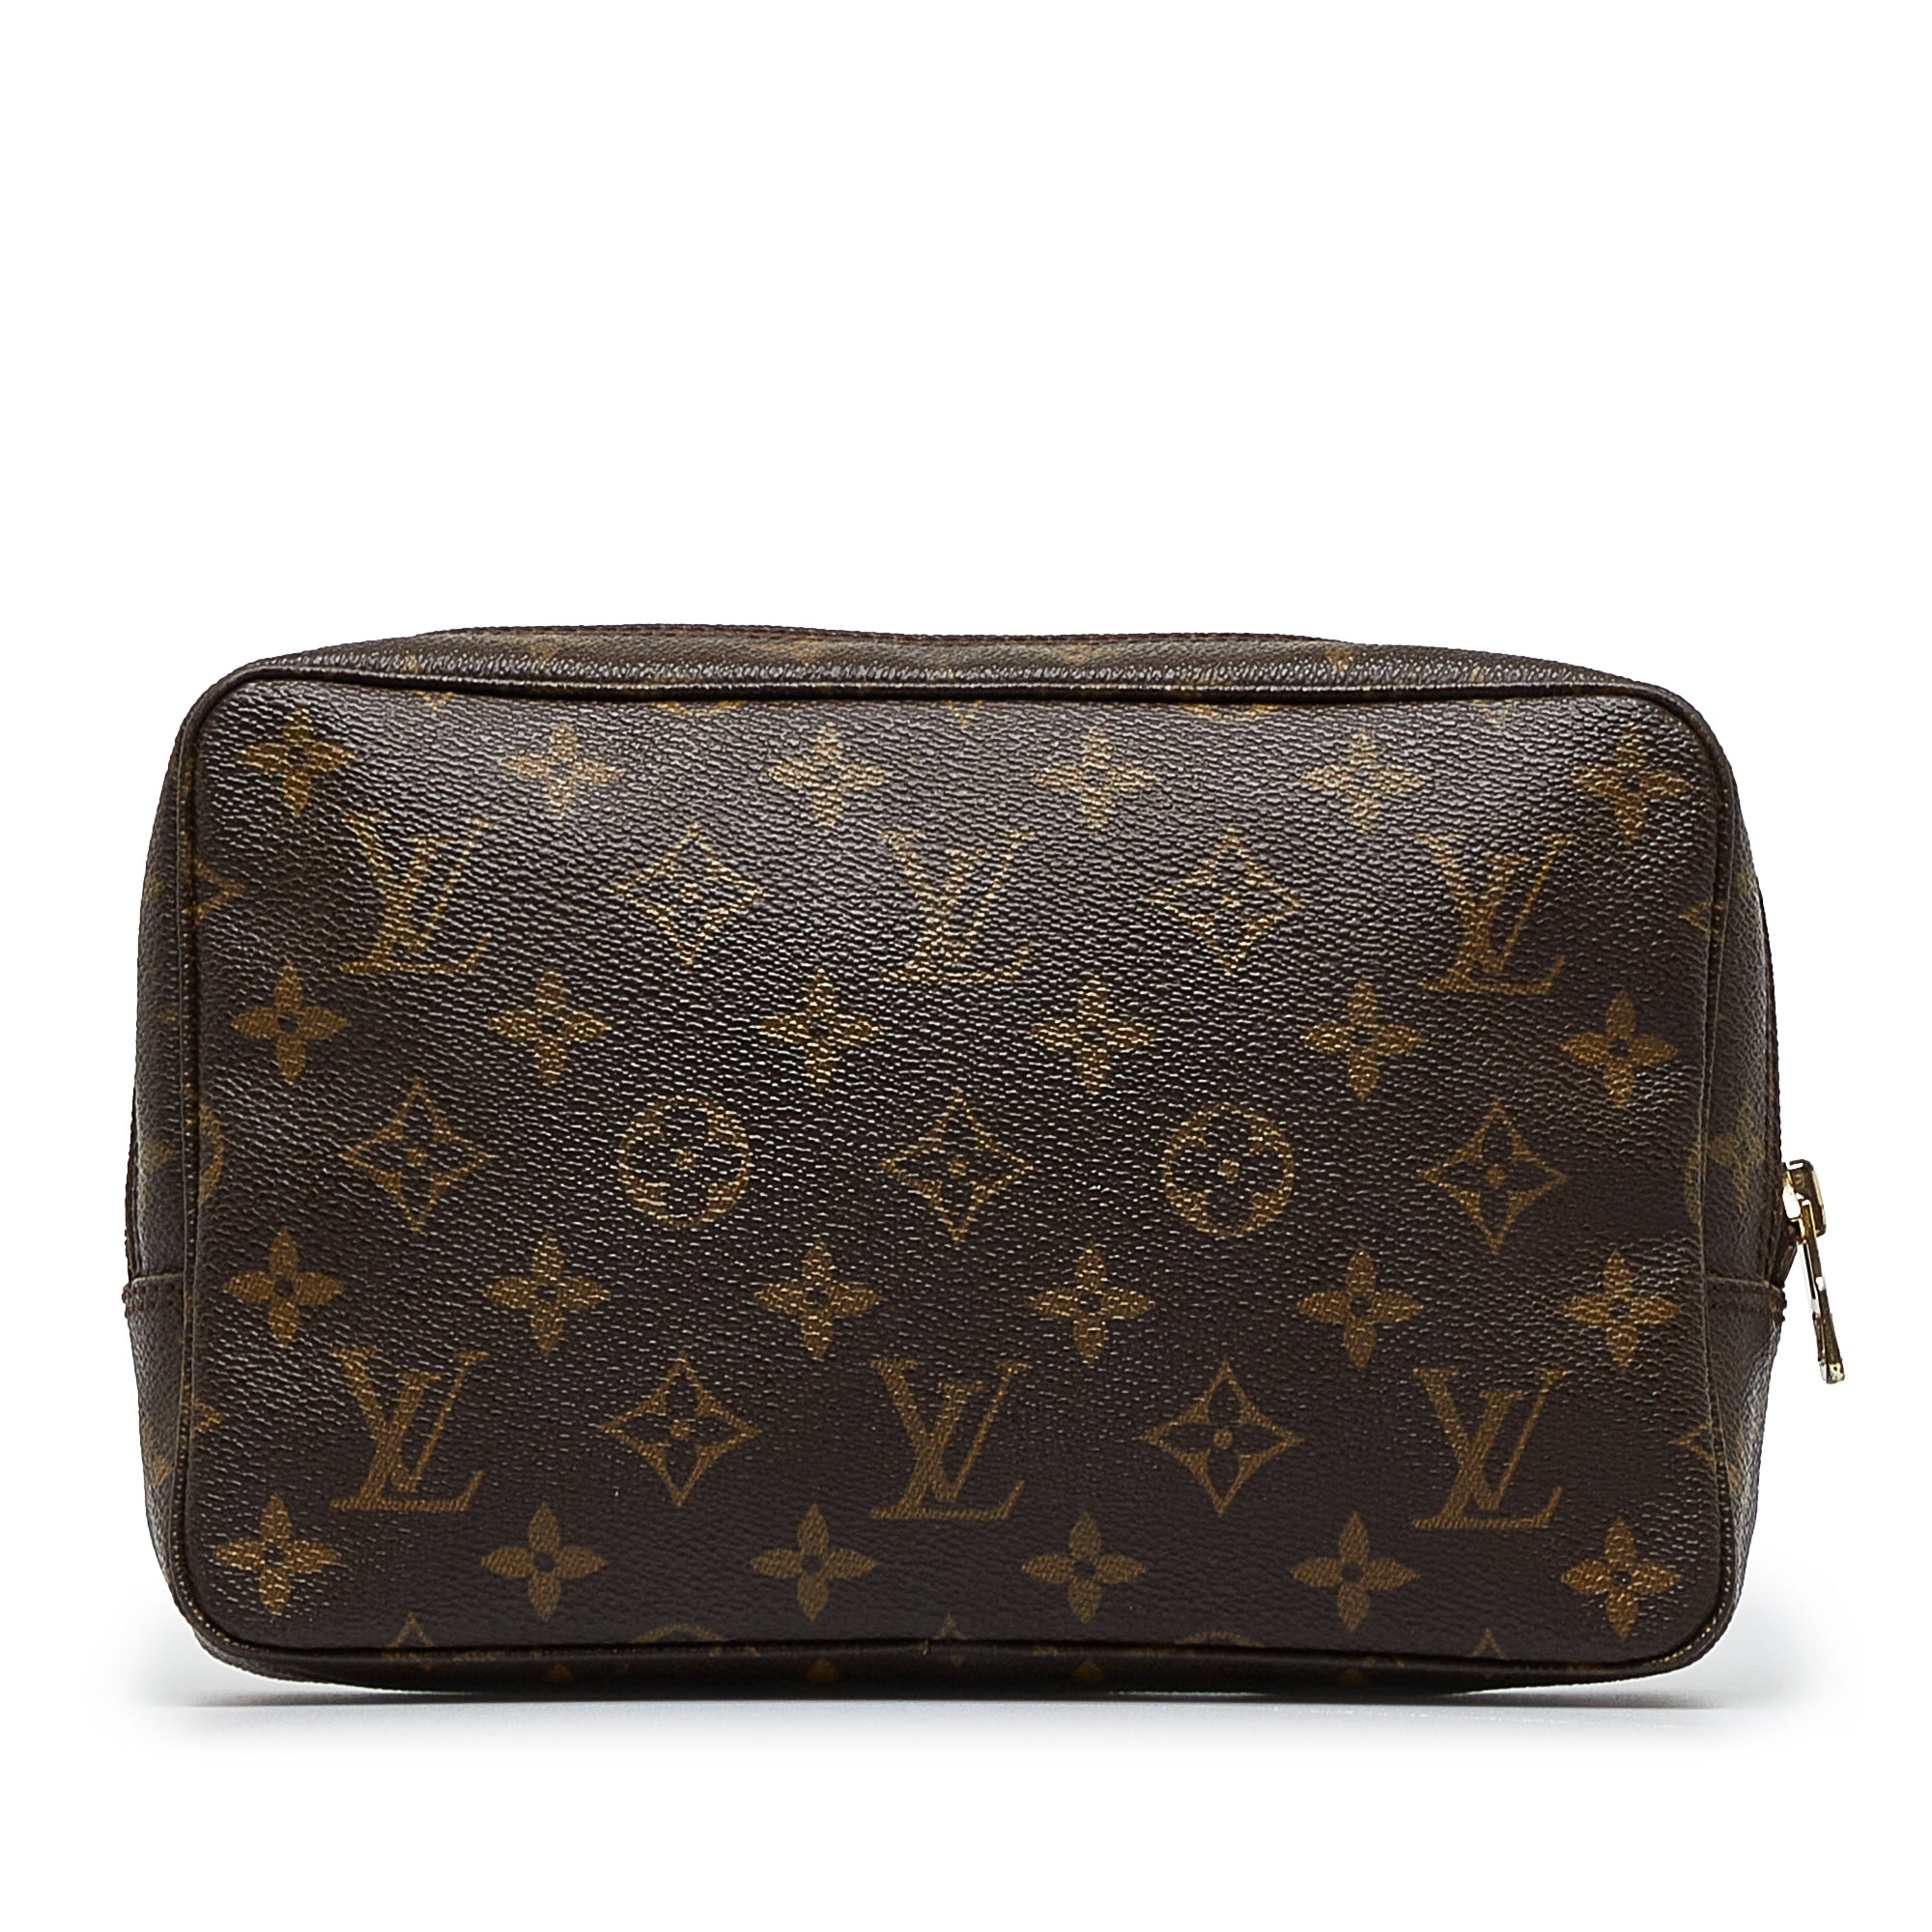 Louis Vuitton small pochette replacement piece for bucket bag 23. 